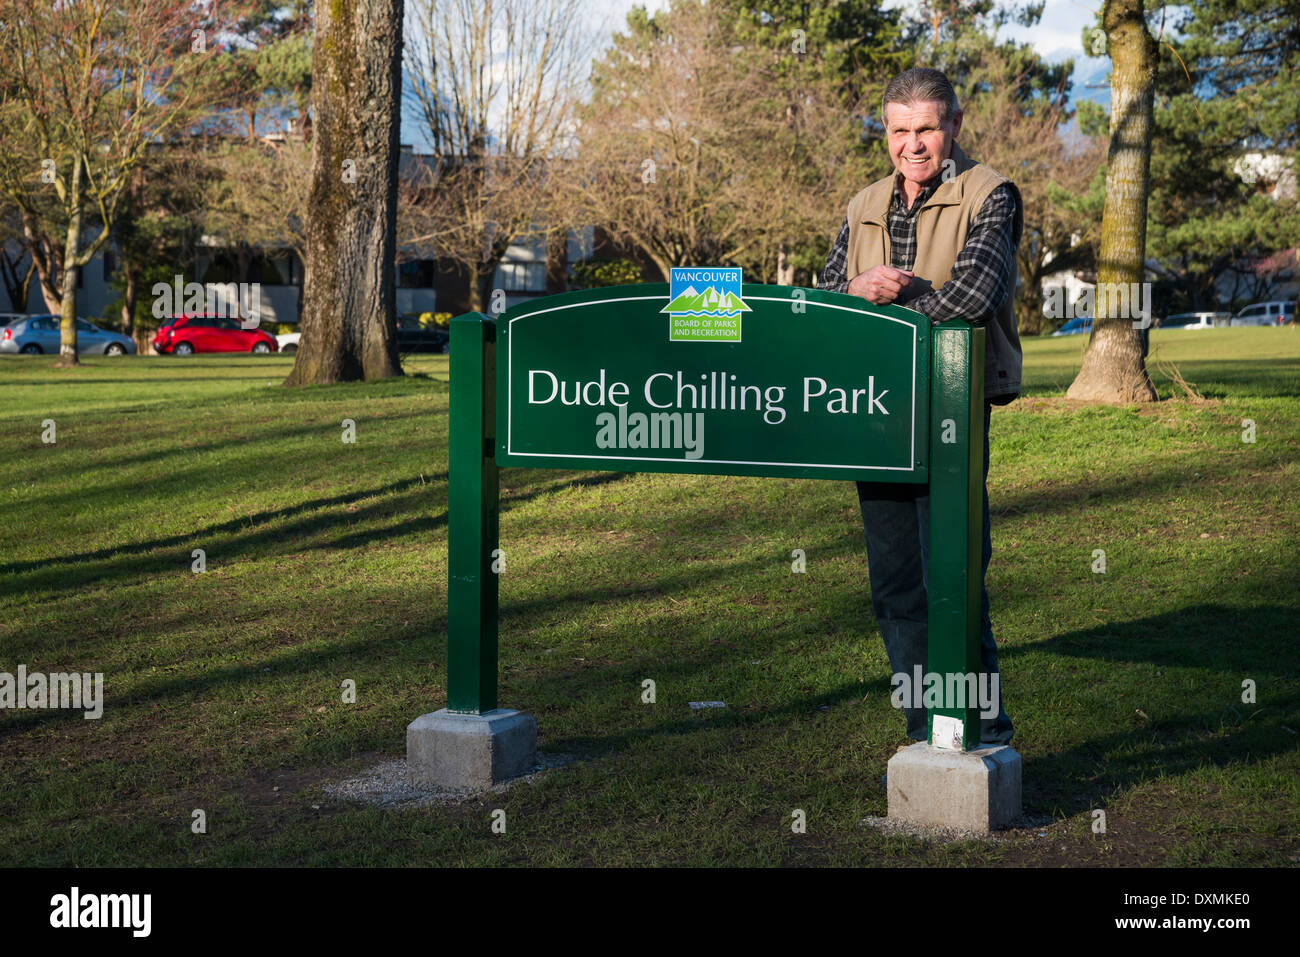 Man poses by infamous 'Dude Chilling Park' sign, Vancouver, British Columbia, Canada Stock Photo